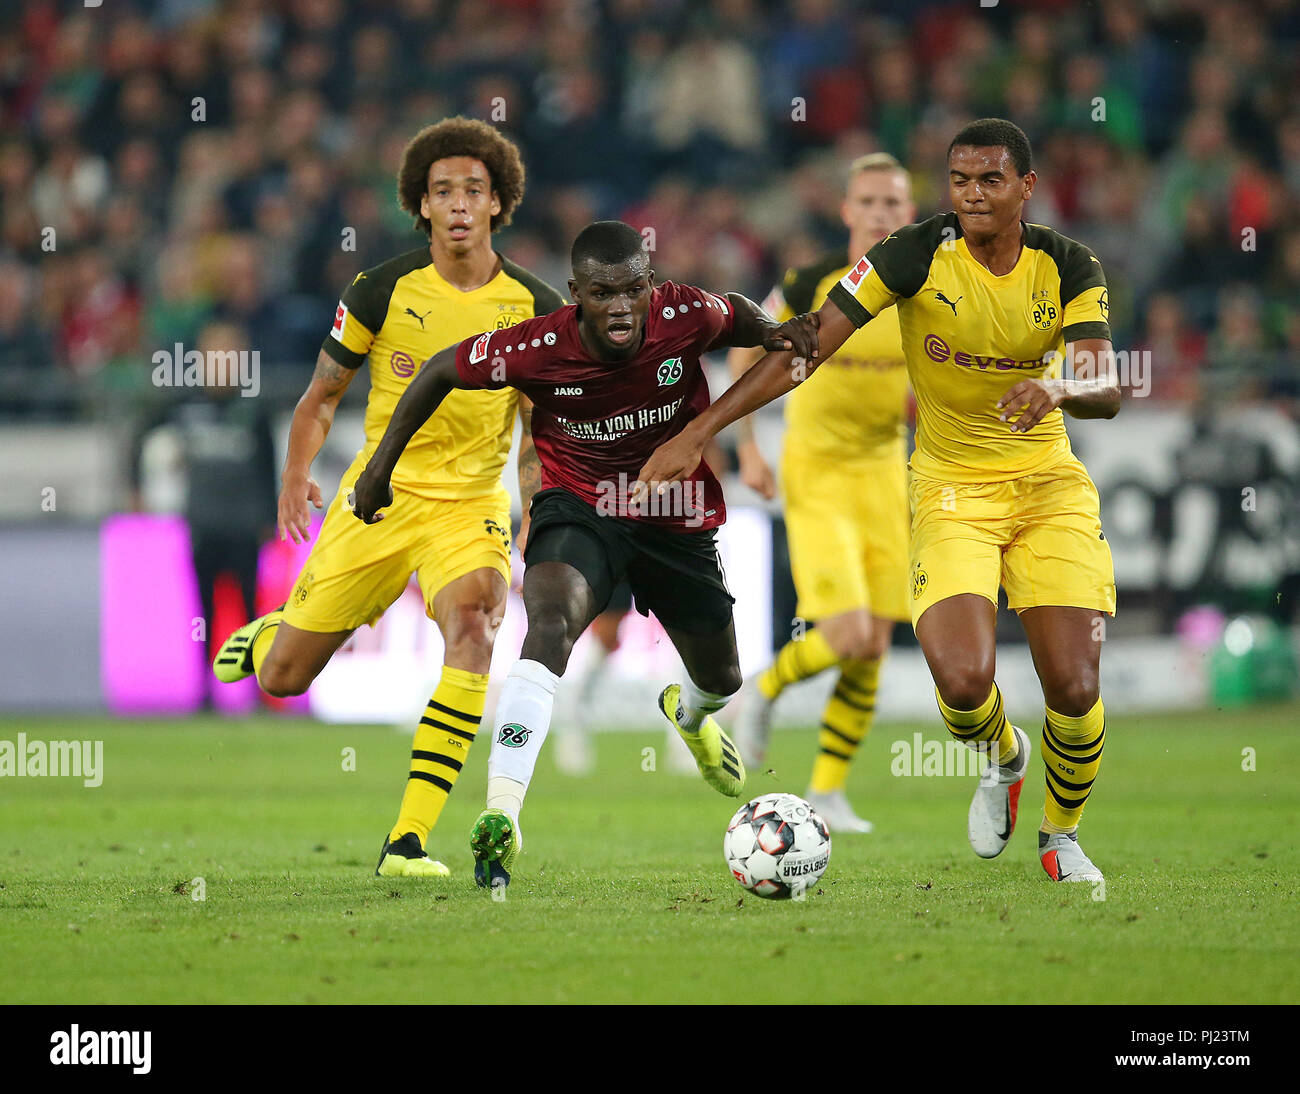 Hanover, Deutschland. 31st Aug, 2018. 31.08.2018, Football 1. Bundesliga 2018/2019, 2. matchday, Hanover 96 - Borussia Dortmund, in the HDI-Arena Hannover. left to right Axel Witsel (Dortmund), Ihlas Bebou (Hanover) in duels with Manuel Akanji (Dortmund) *** DFL regulations prohibit any use of images as image sequences and/or quasi-video. *** | usage worldwide Credit: dpa/Alamy Live News Stock Photo